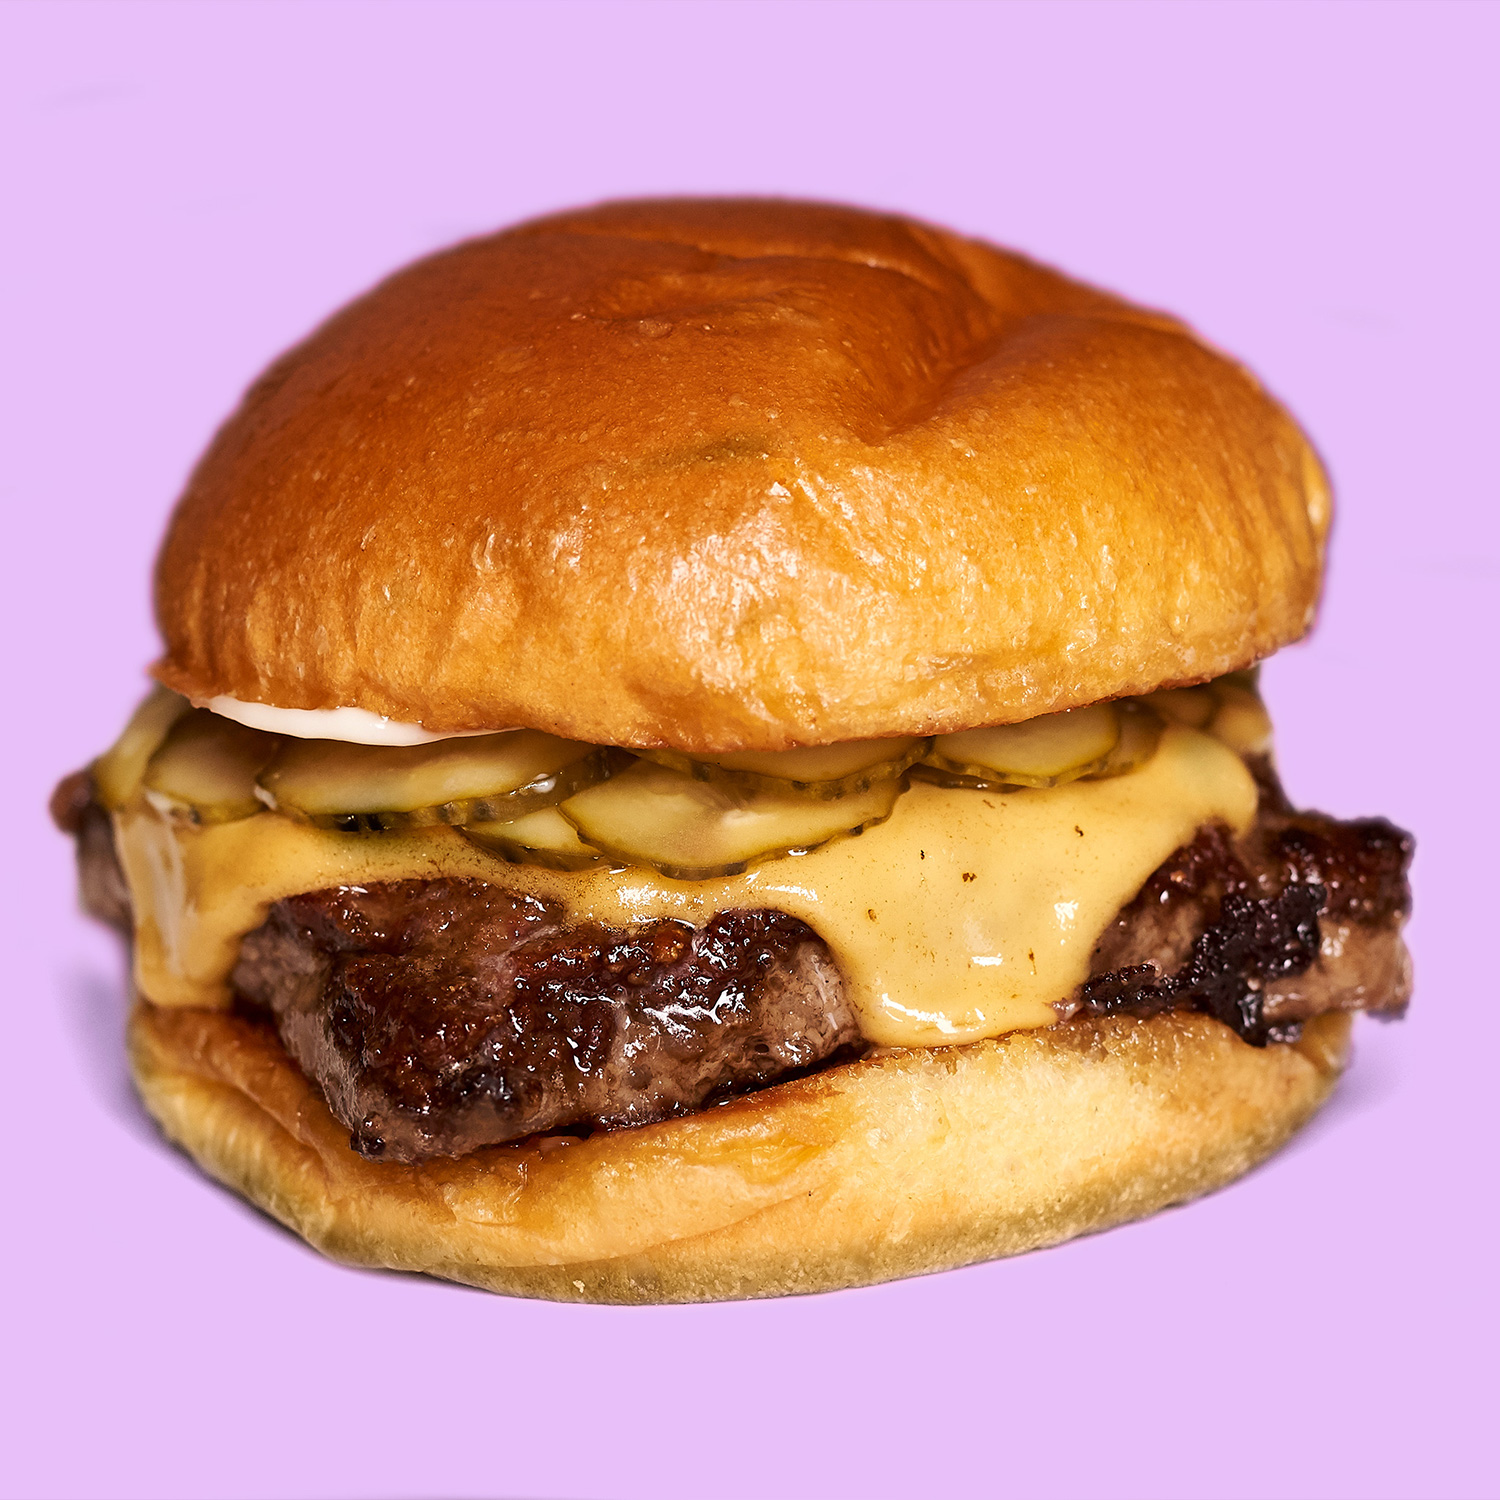 A Richard Eaglespoon burger with a purple background and a square burger patty. With the right technology, any patty shape is possible.